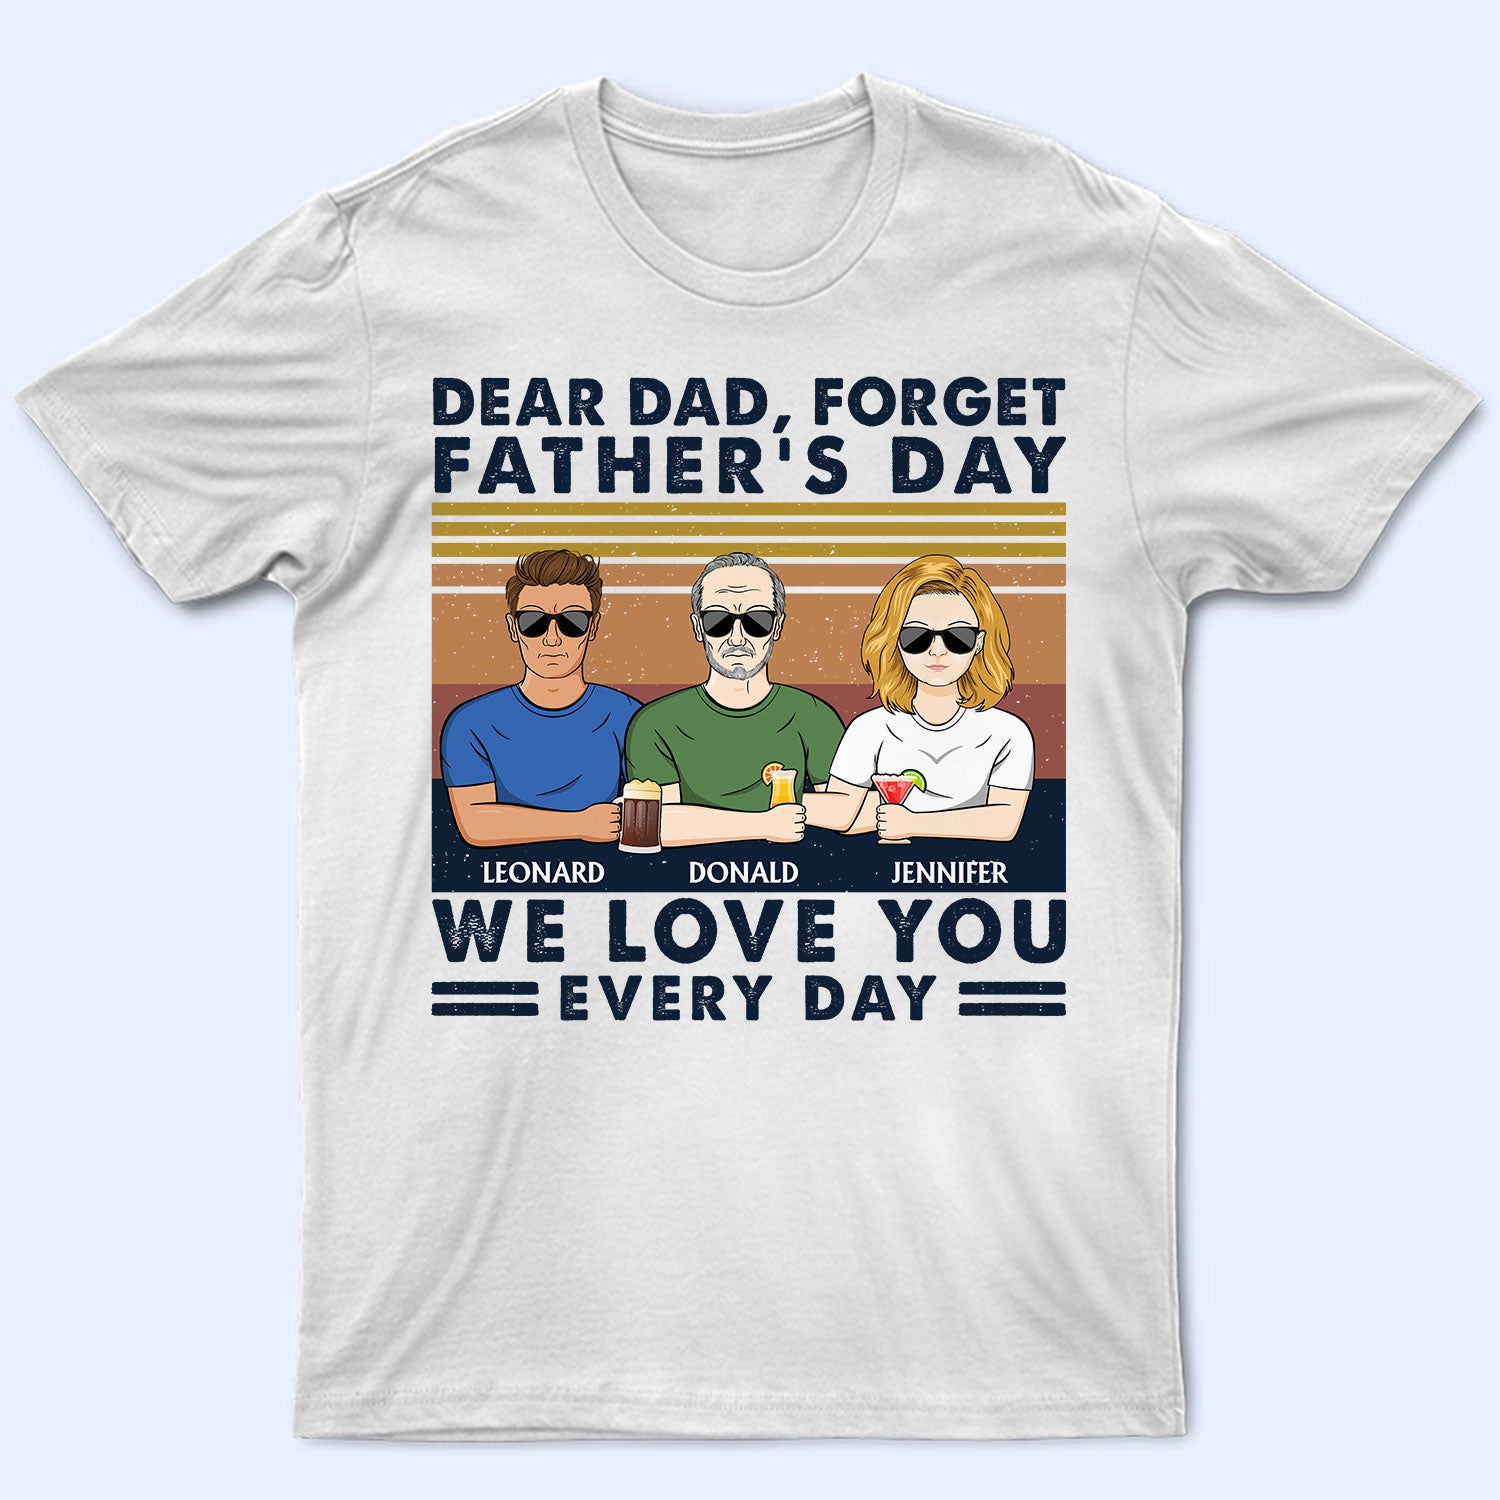 Dear Dad We Love You Every Day Retro - Birthday, Loving Gift For Father, Grandpa, Grandfather - Personalized Custom T Shirt